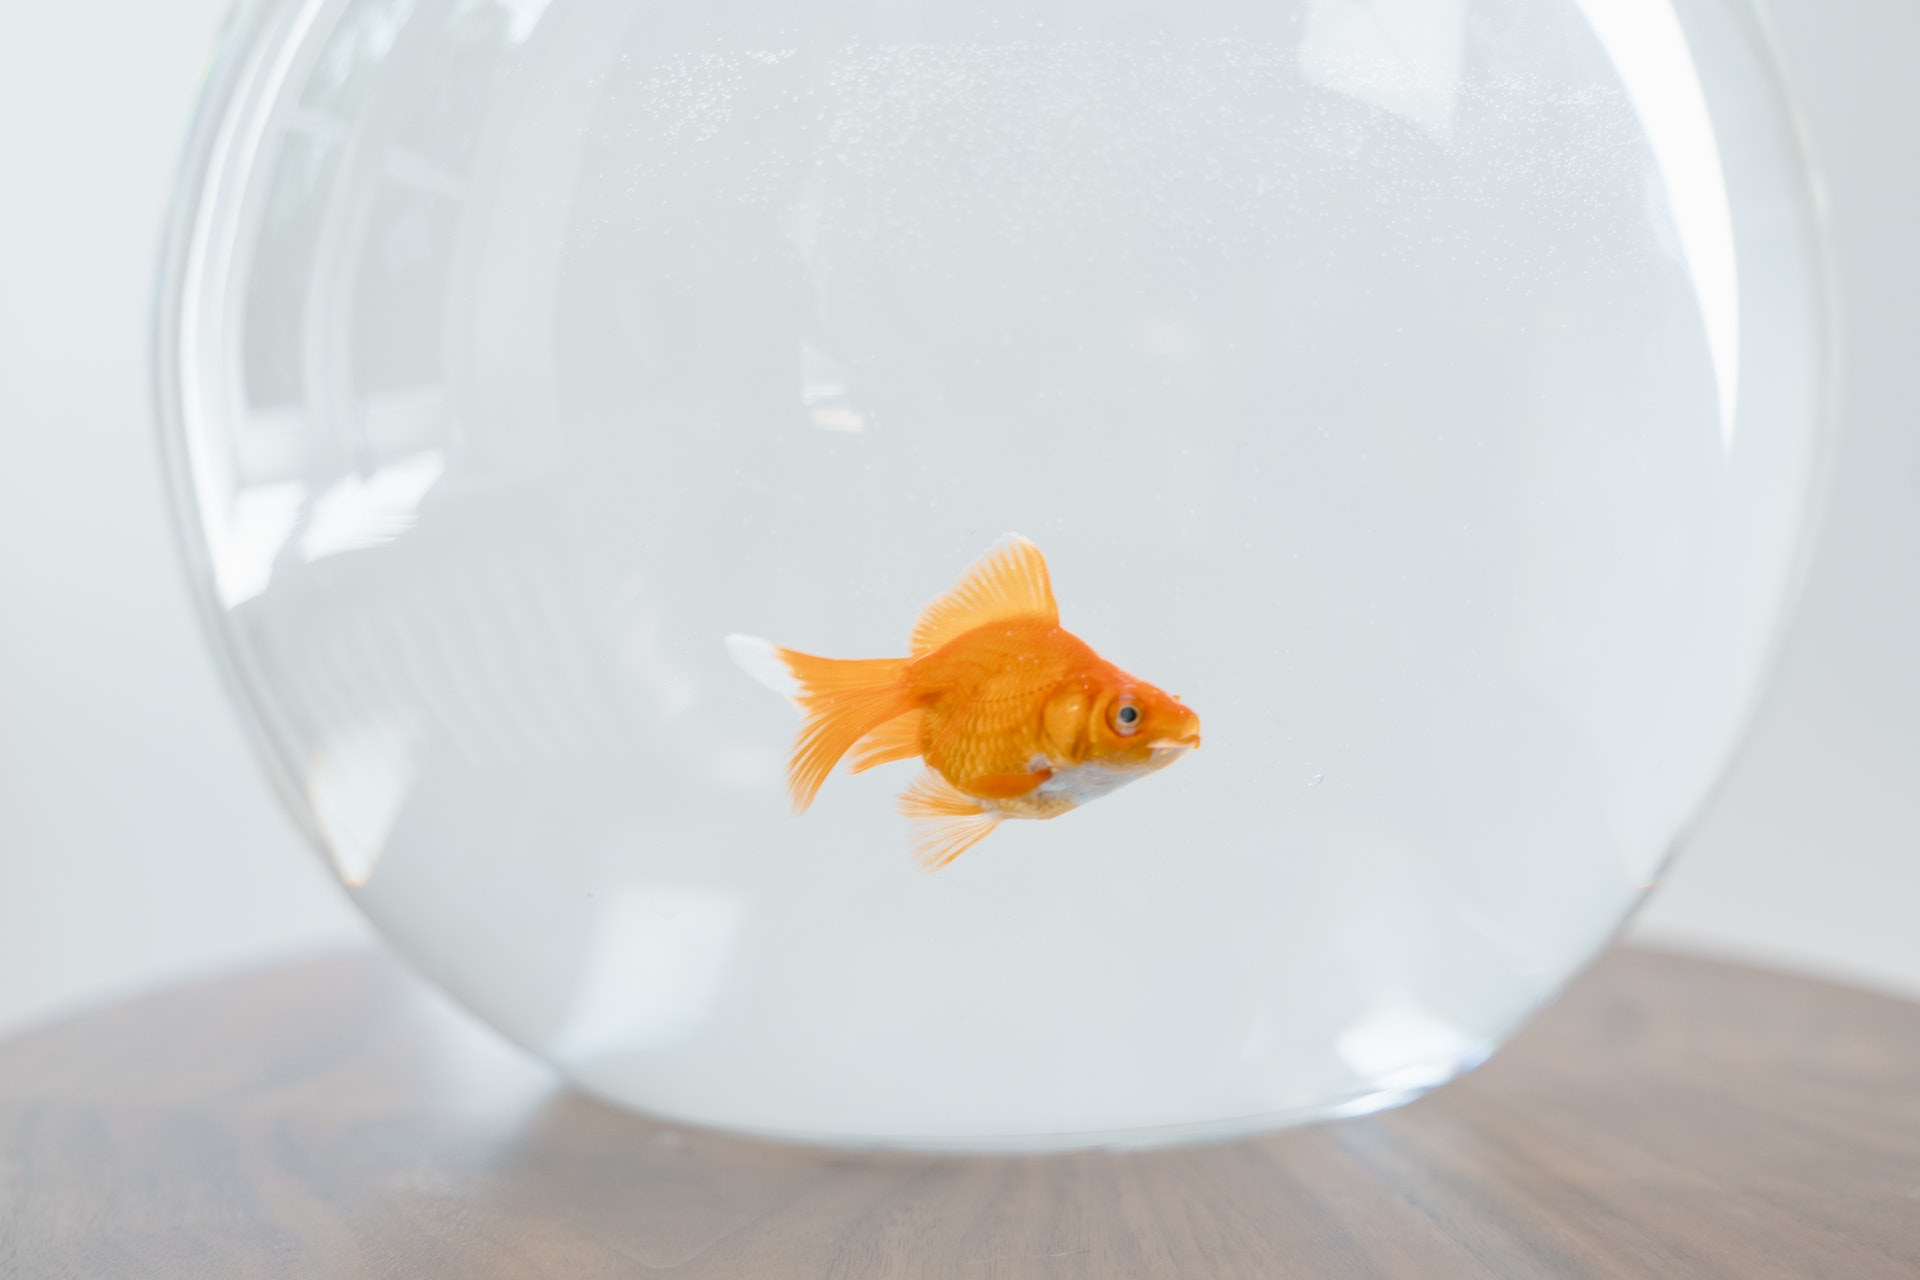 A fish in a fishbowl | Source: Pexels